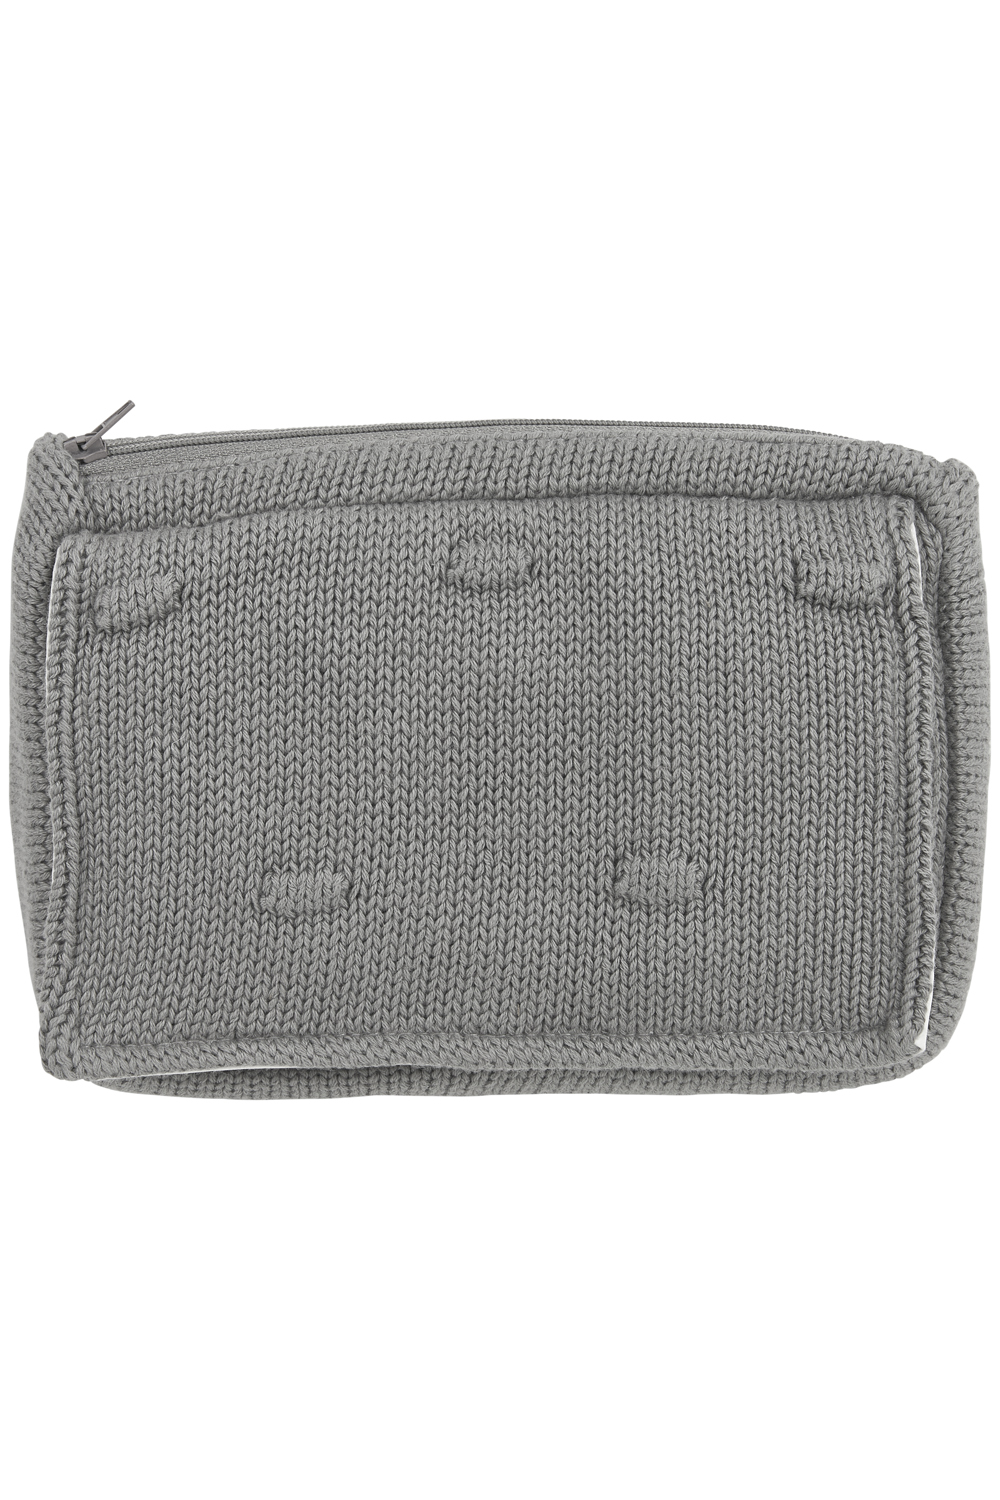 Wipes pouch Knots - grey